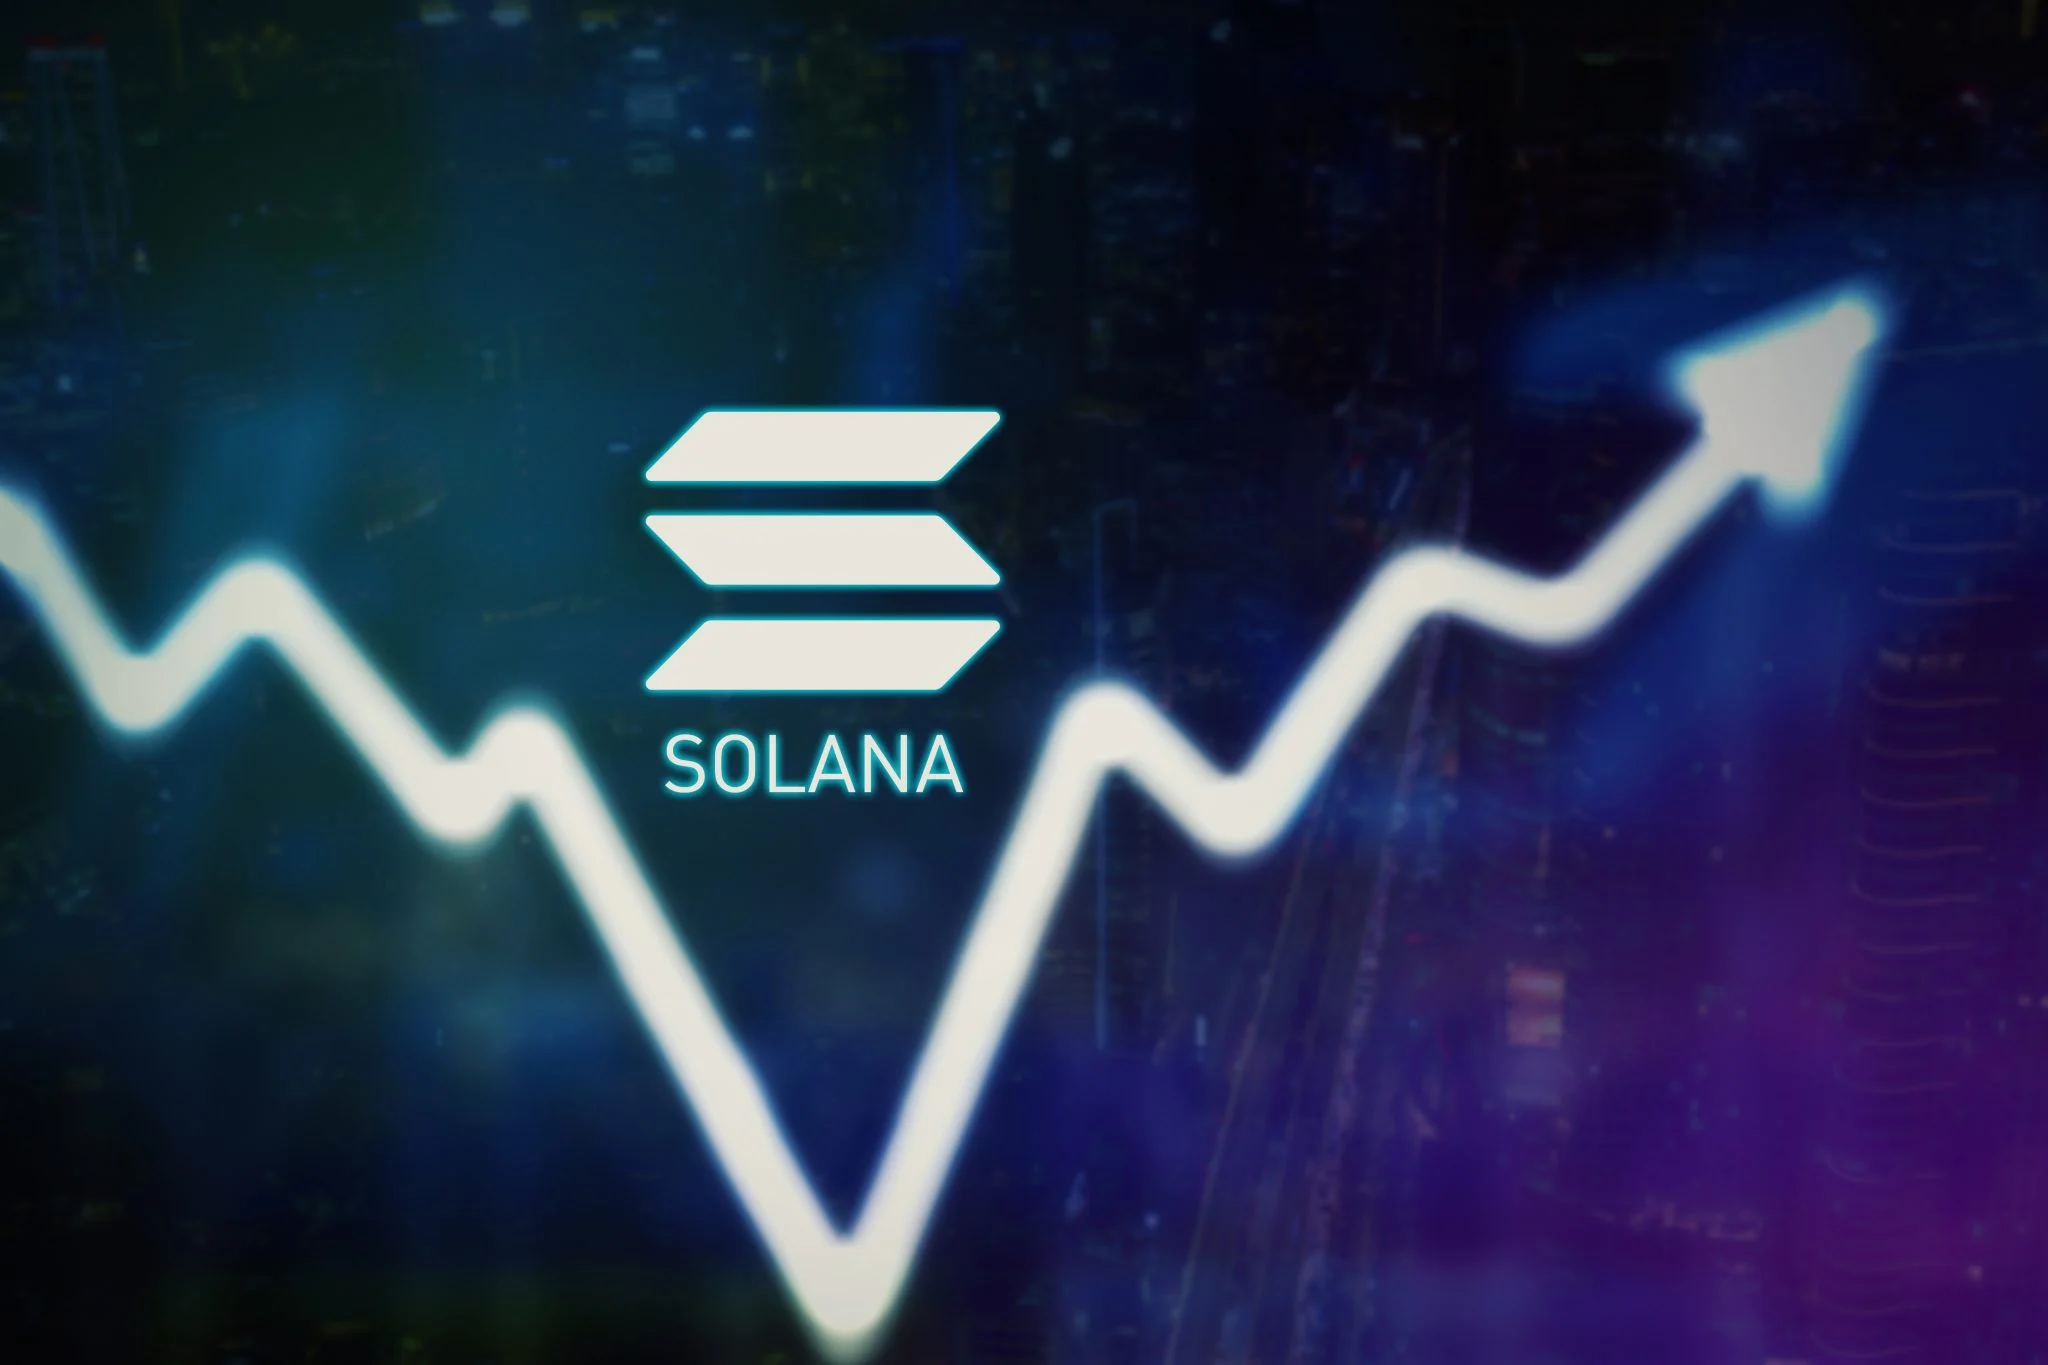 Solana coin is a project that has recently attracted attention in the cryptocurrency market. Solana is a blockchain platform that offers scalability, speed and low transaction fees. Solana's native cryptocurrency, SOL, has gained more than 700% since July 2021 and has risen to 7th place on the CoinMarketCap rankings.